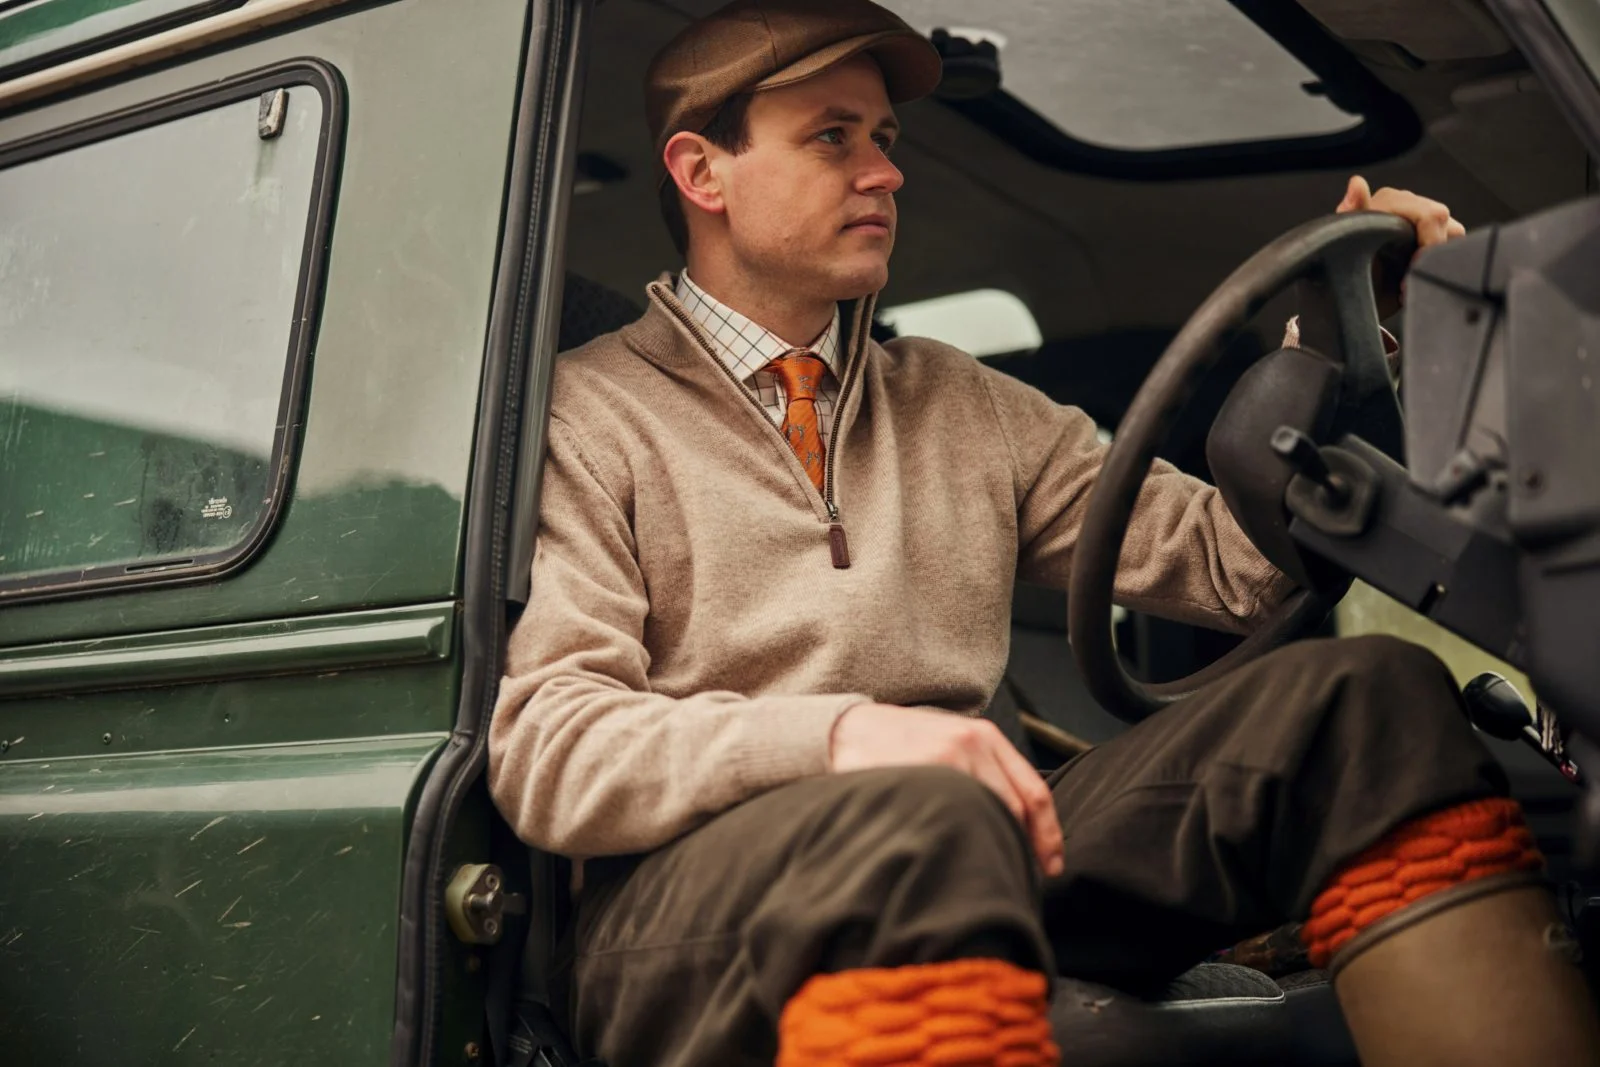 Gentleman sitting in a landrover wearing country clothing